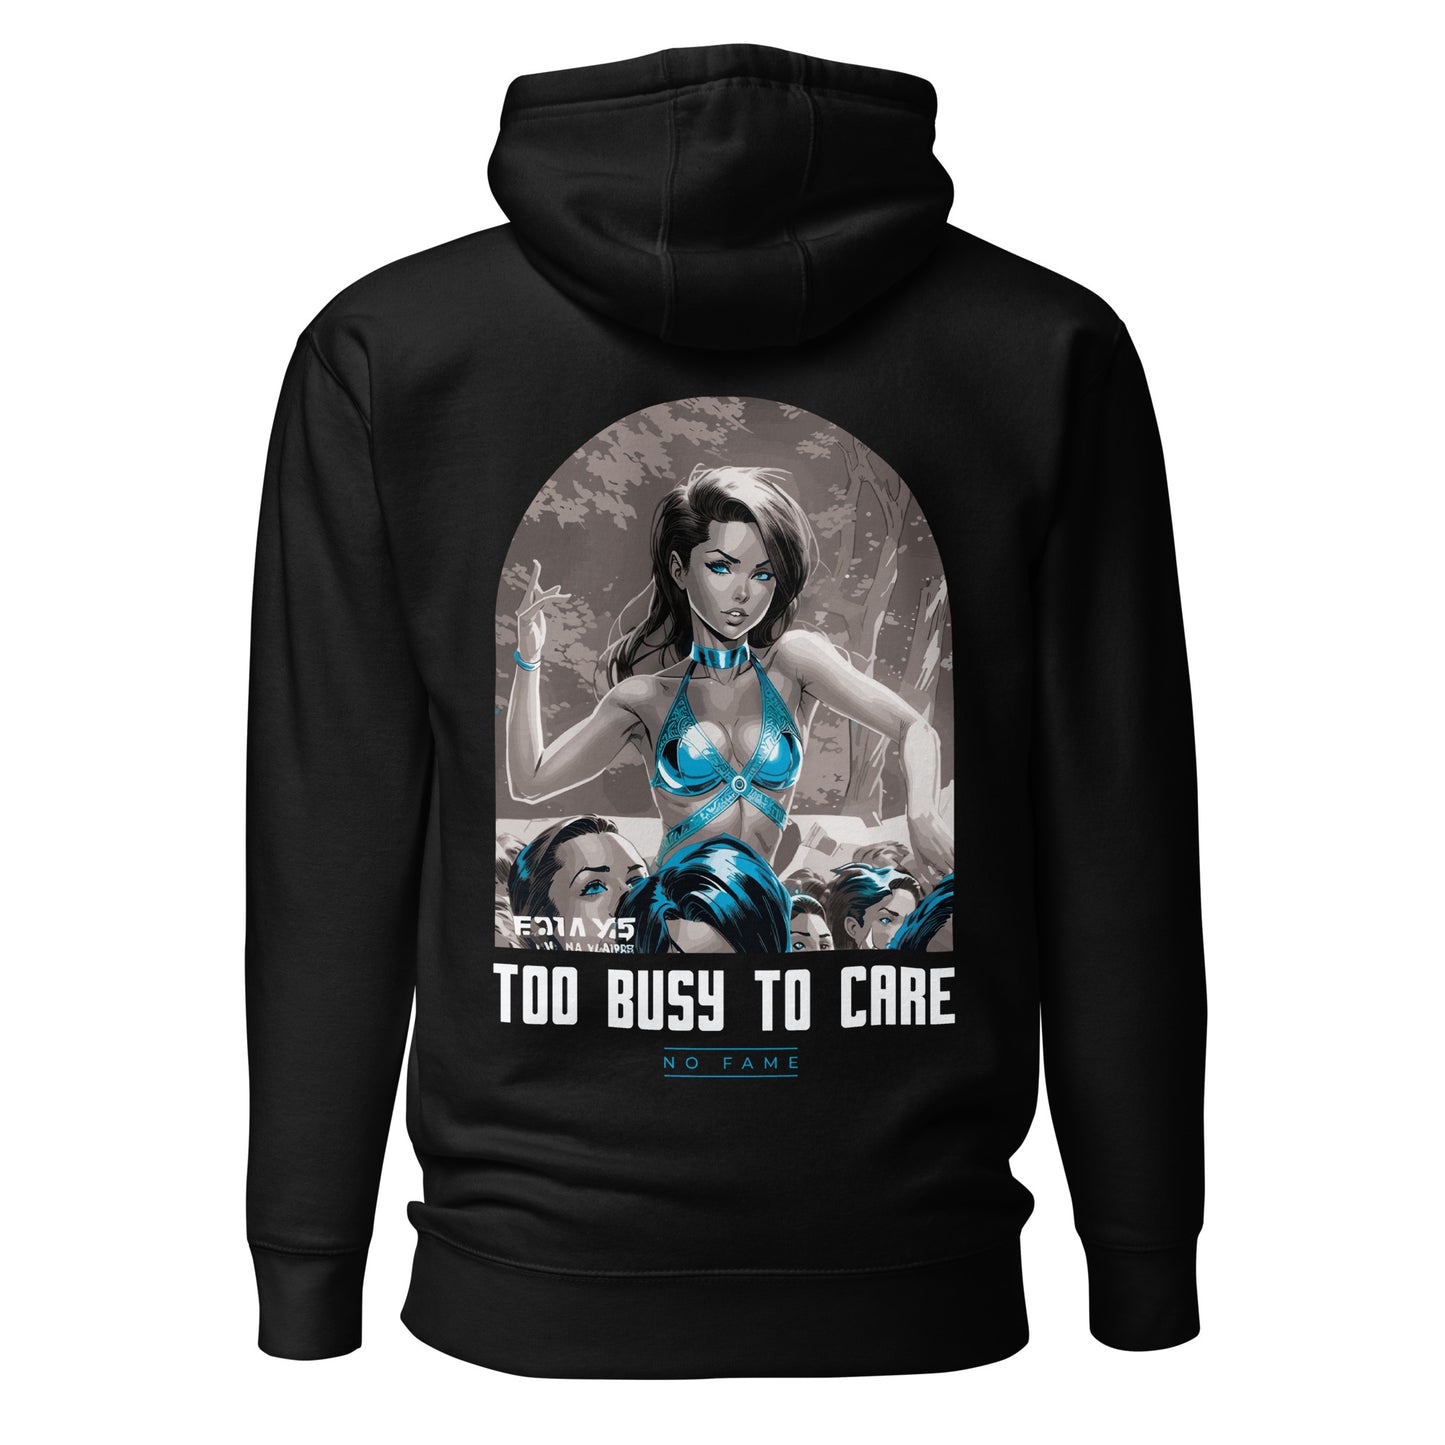 No Fame - Too Busy To Care Hoodie